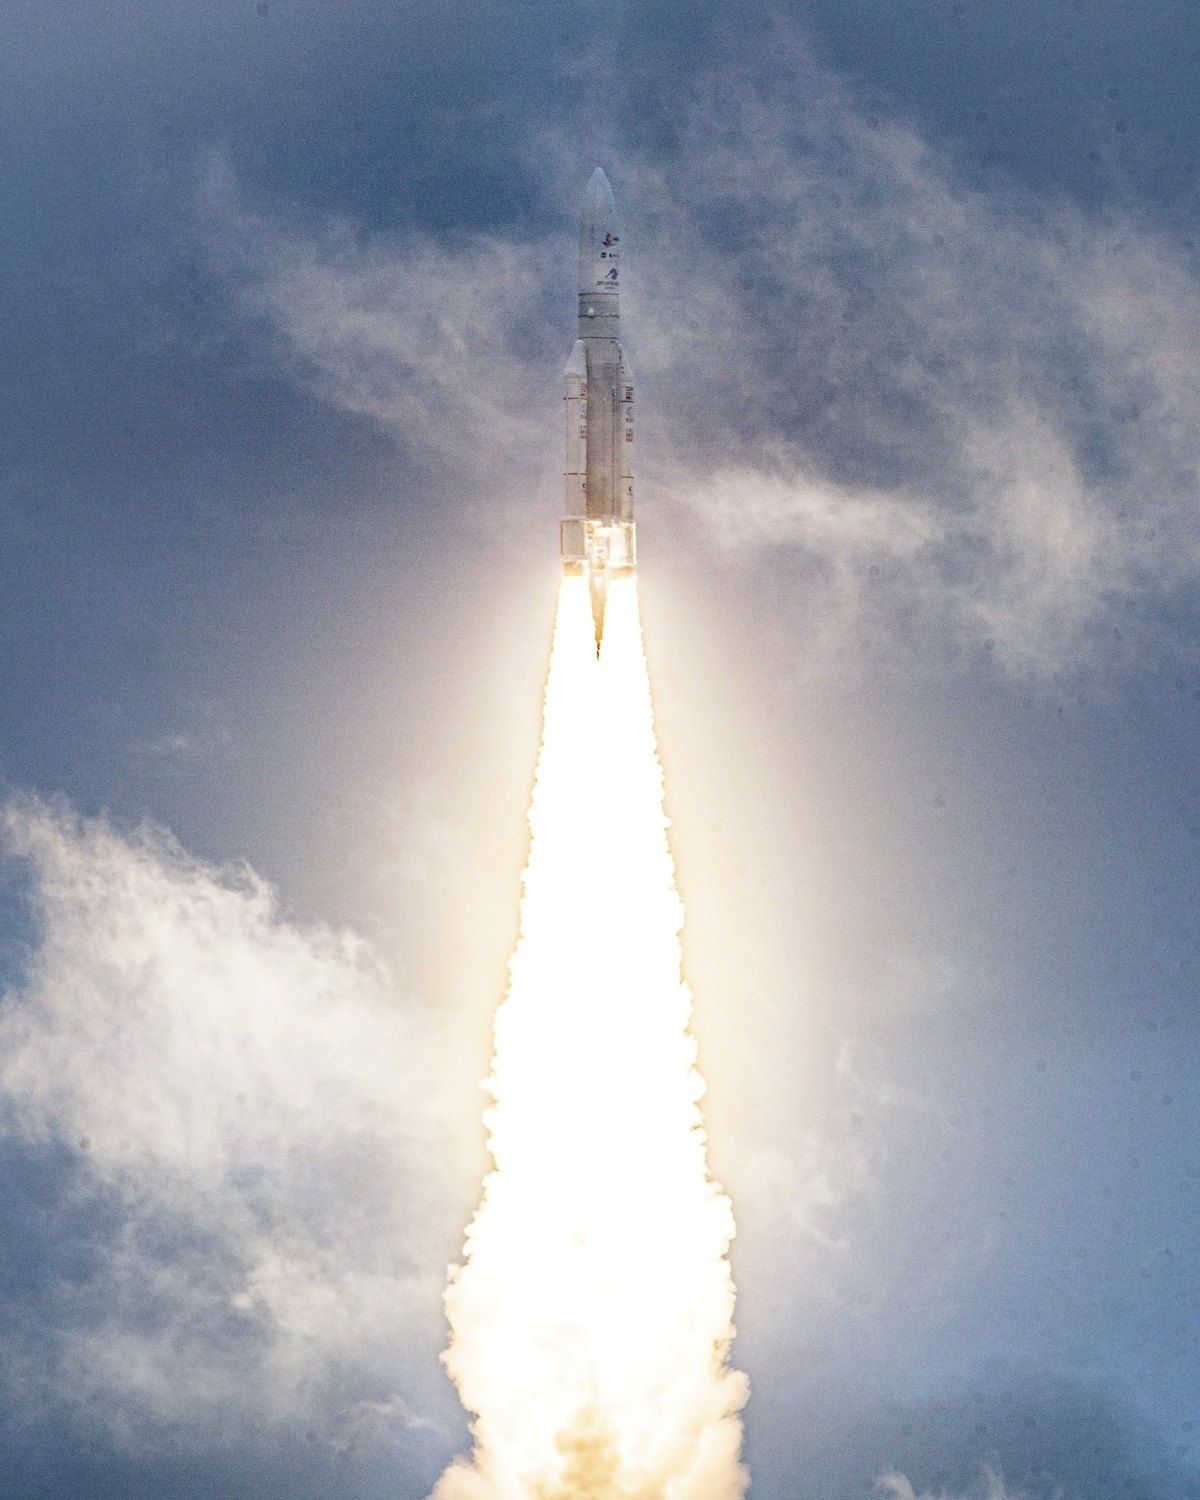 Arianespace’s Ariane 5 rocket launches with NASA’s James Webb Space Telescope onboard